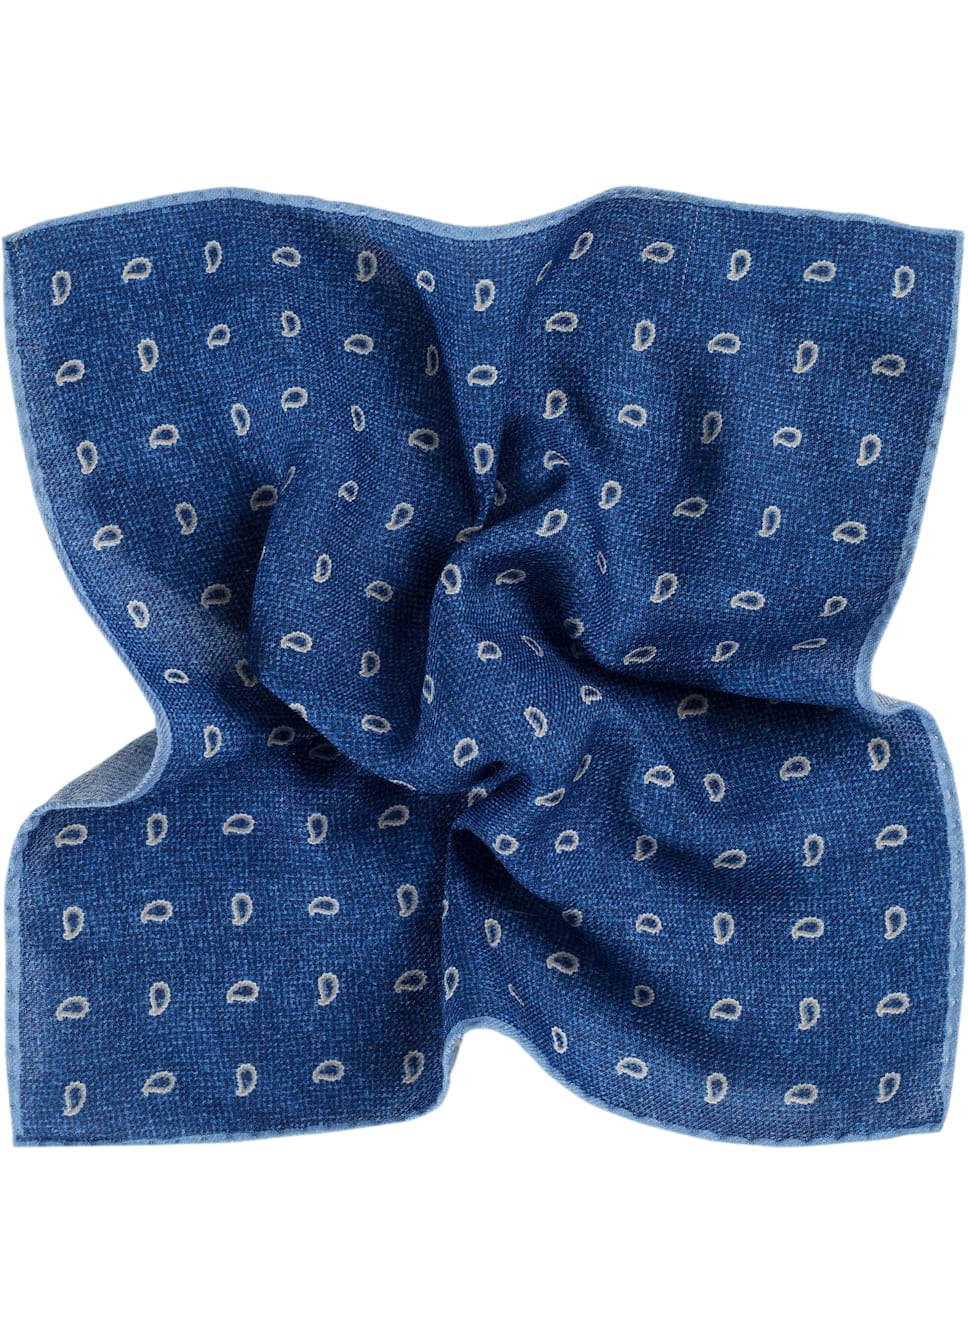 Blue Pocket Square Ps17217 | Suitsupply Online Store